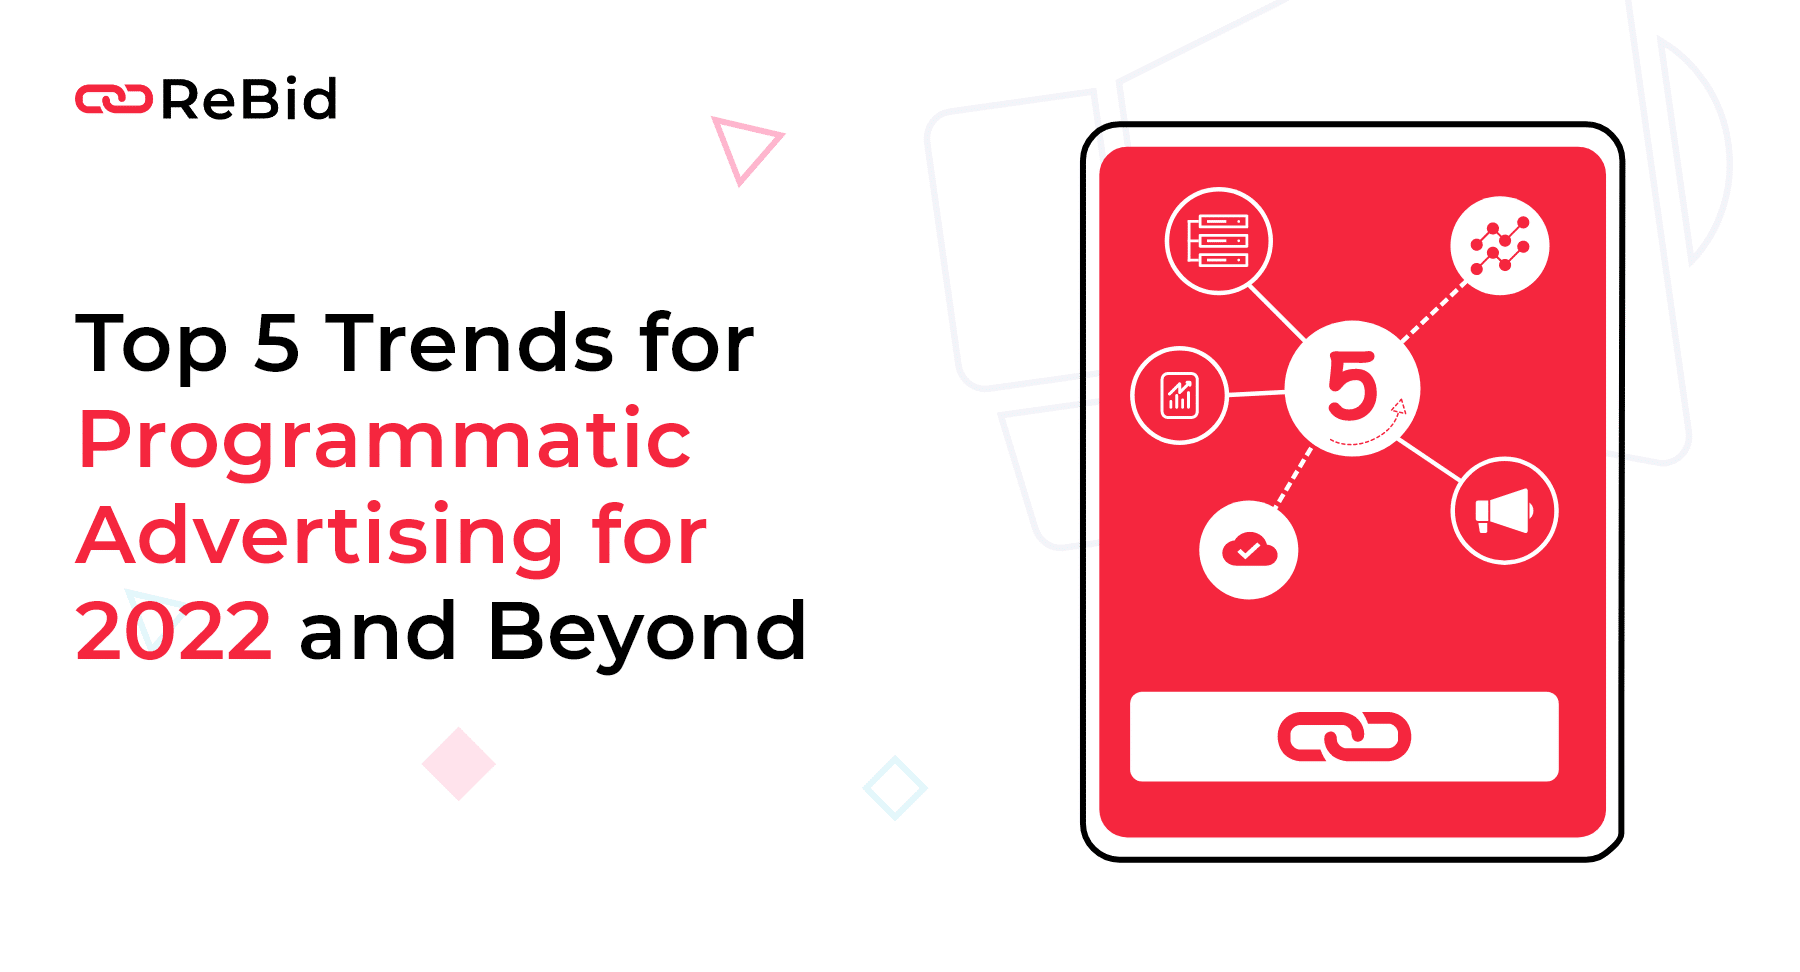 Top 5 Programmatic Advertising Trends for 2022 and Beyond